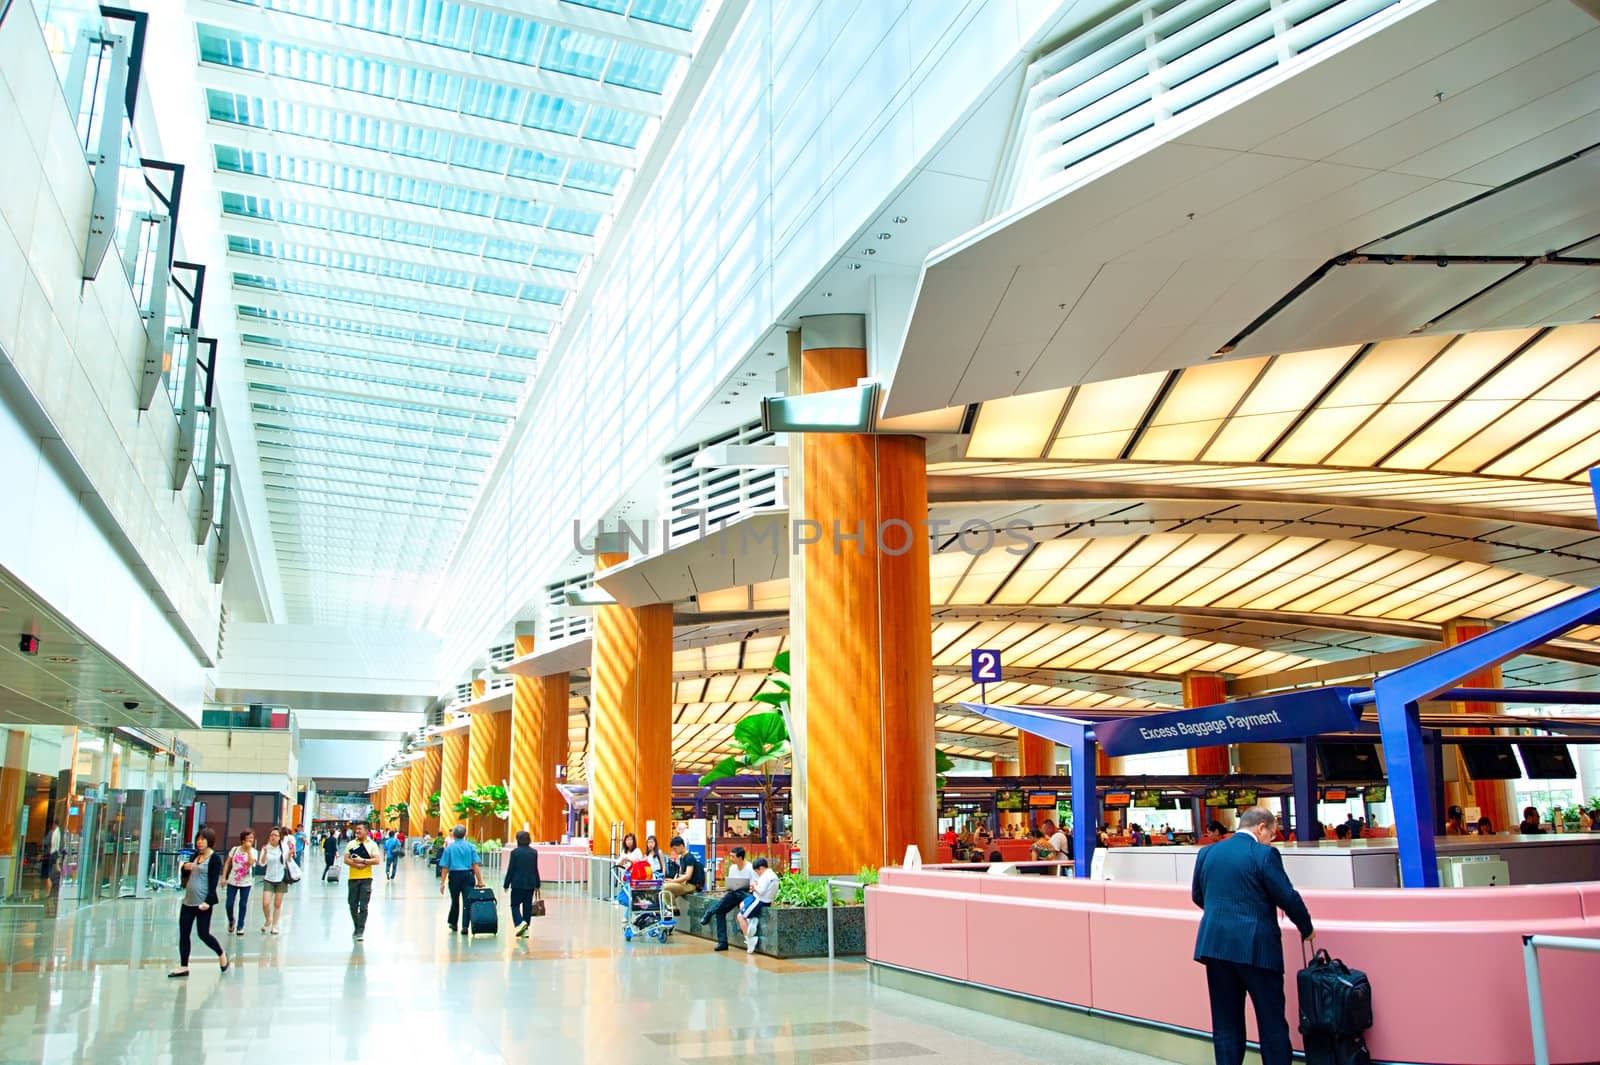 Singapore, Republic of Singapore - March 05, 2013: Modern interior of  Changi International Airport in Singapore. Changi Airport serves more than 100 airlines operating 6,100 weekly flights